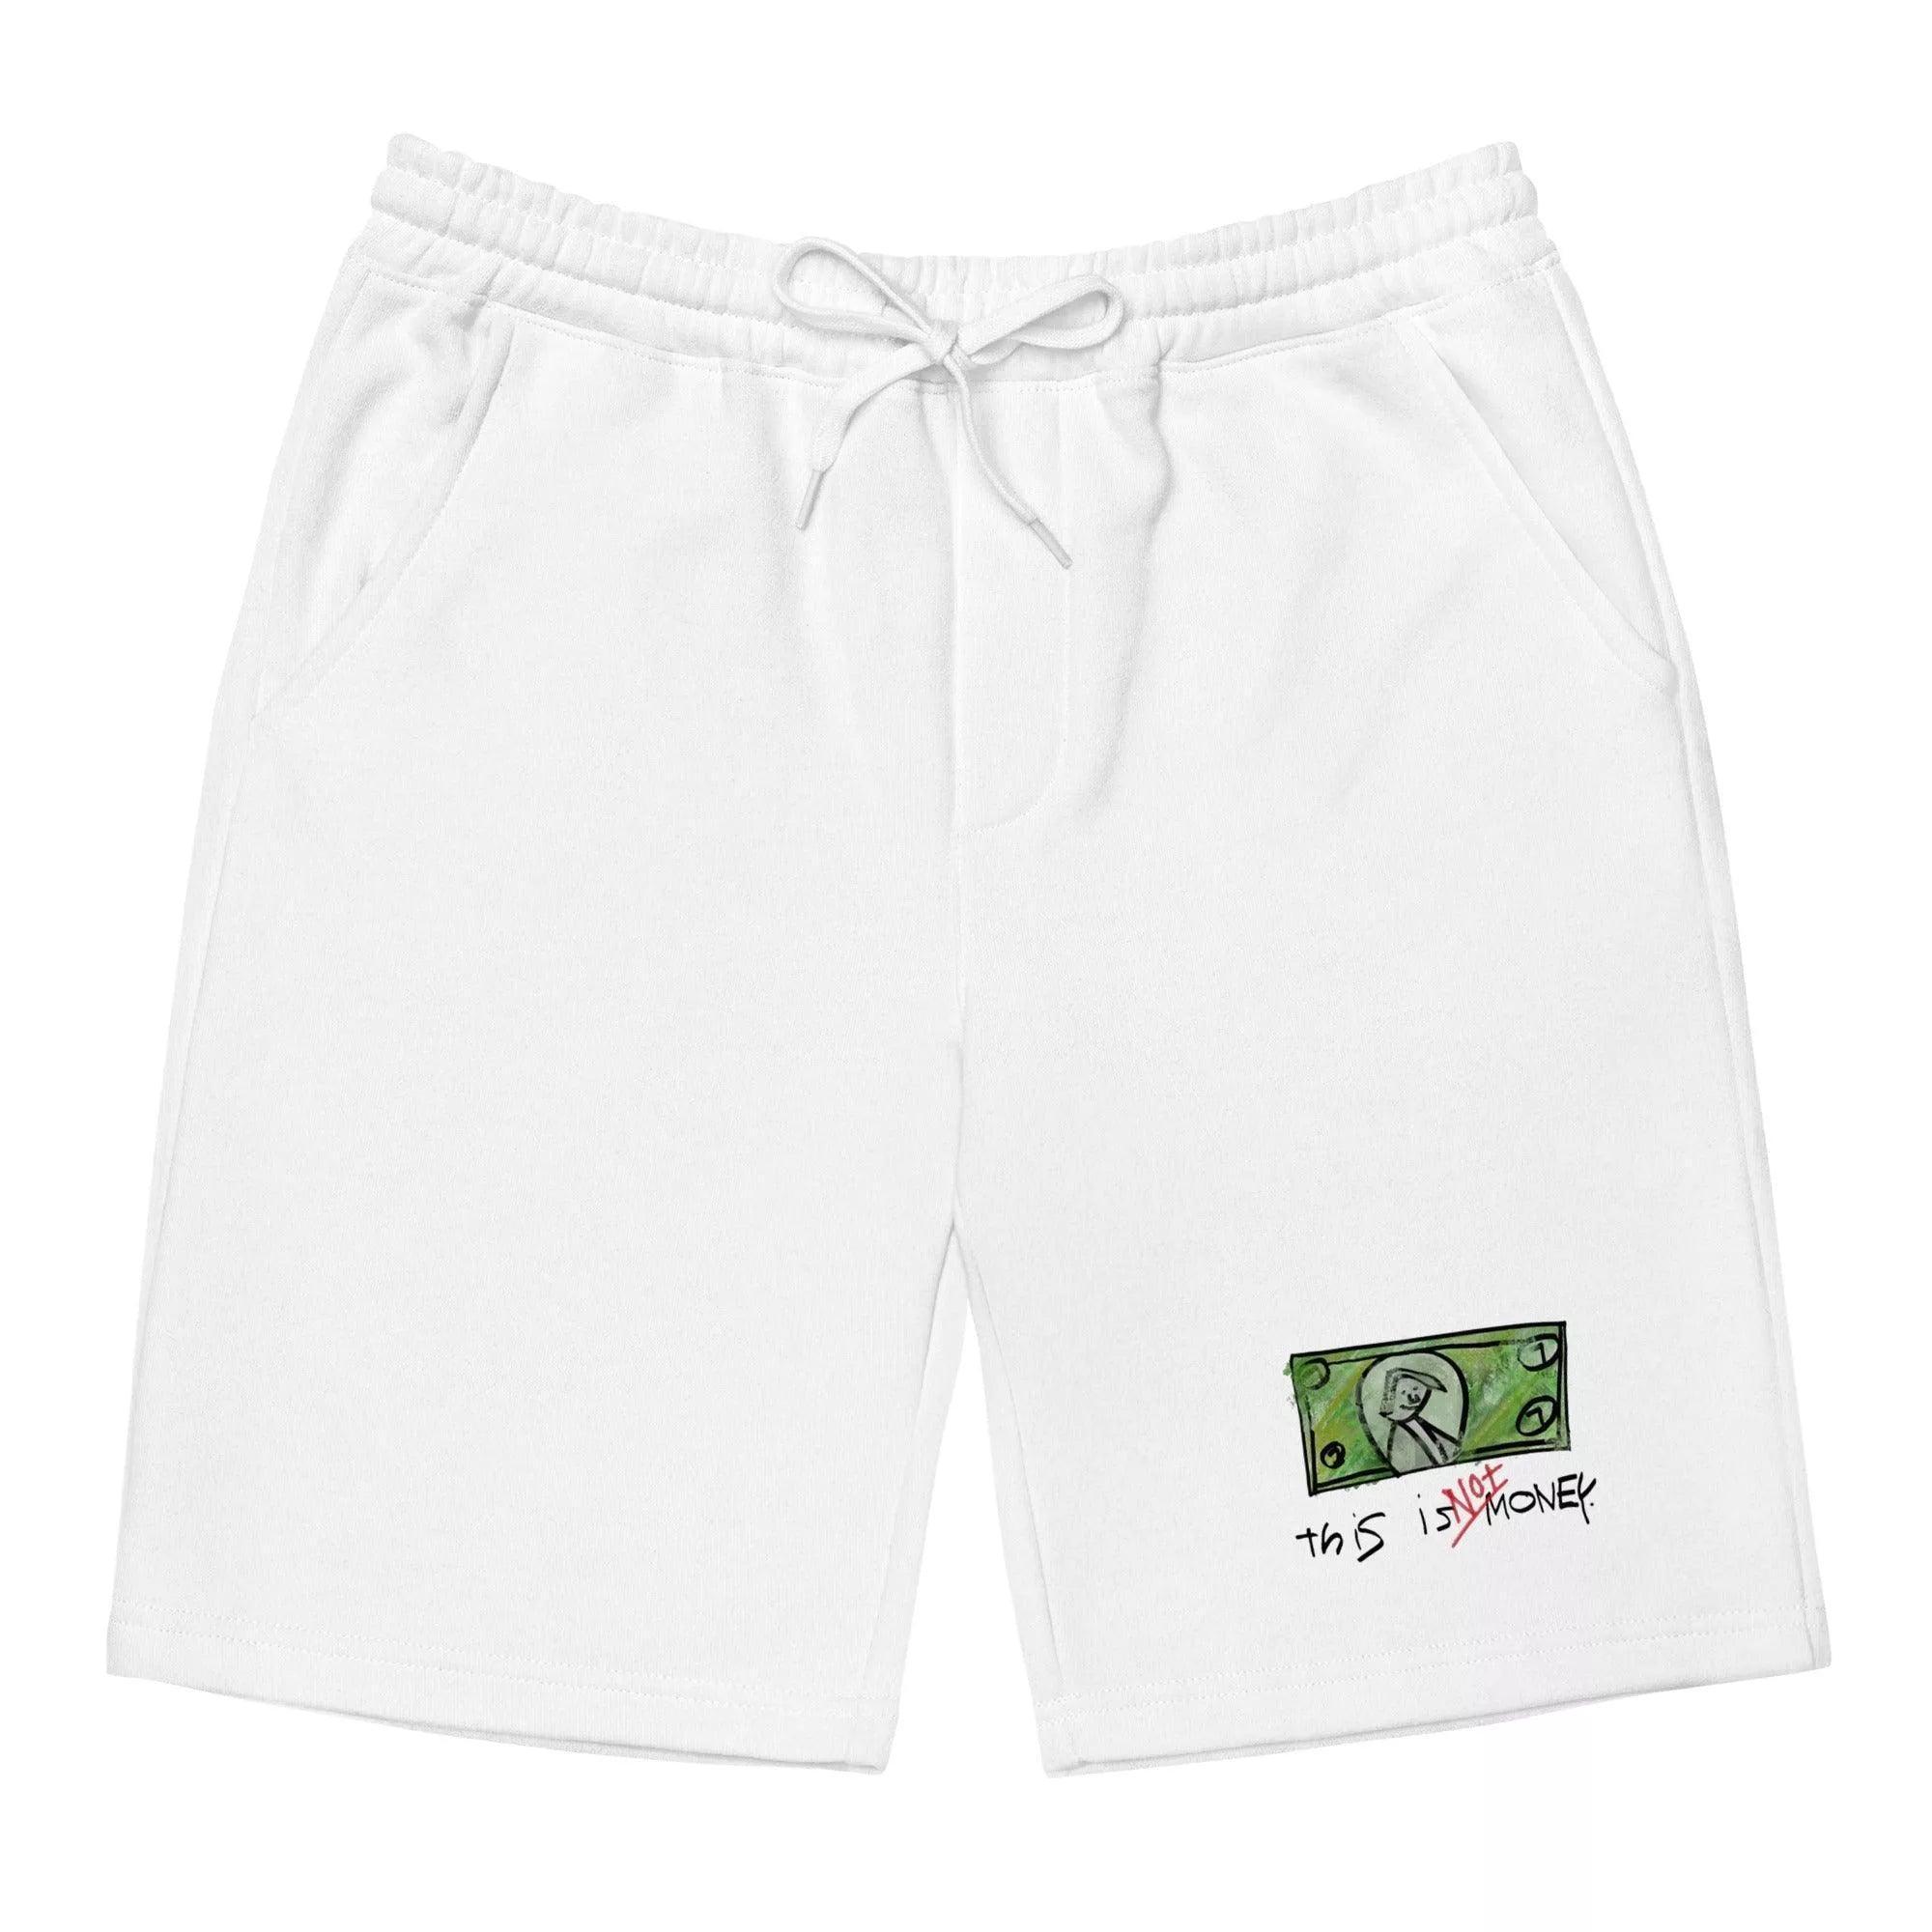 This Is Not Money Fleece Shorts - InvestmenTees